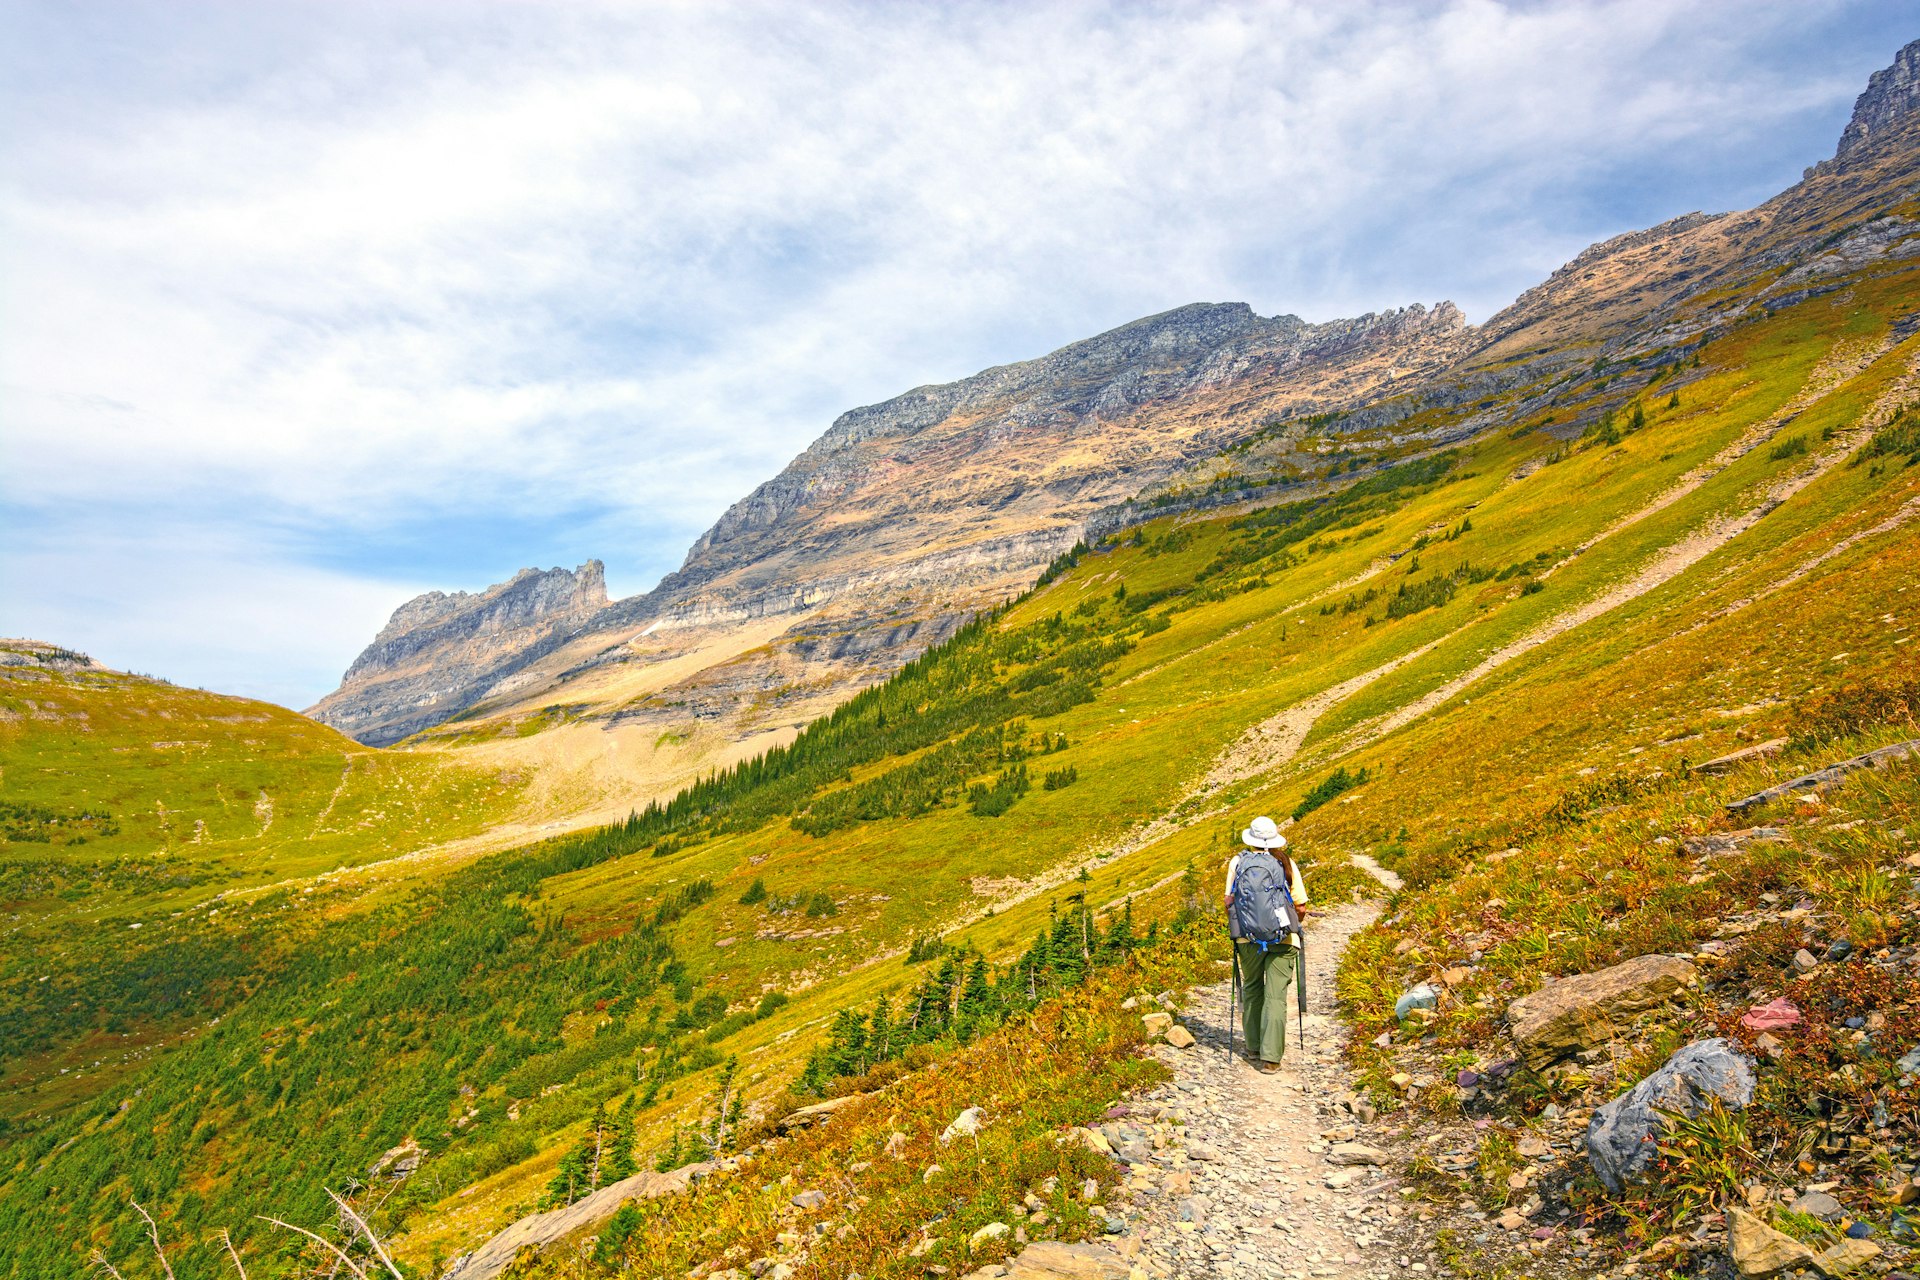 Trekking in Glacier National Park in Montana in the fall